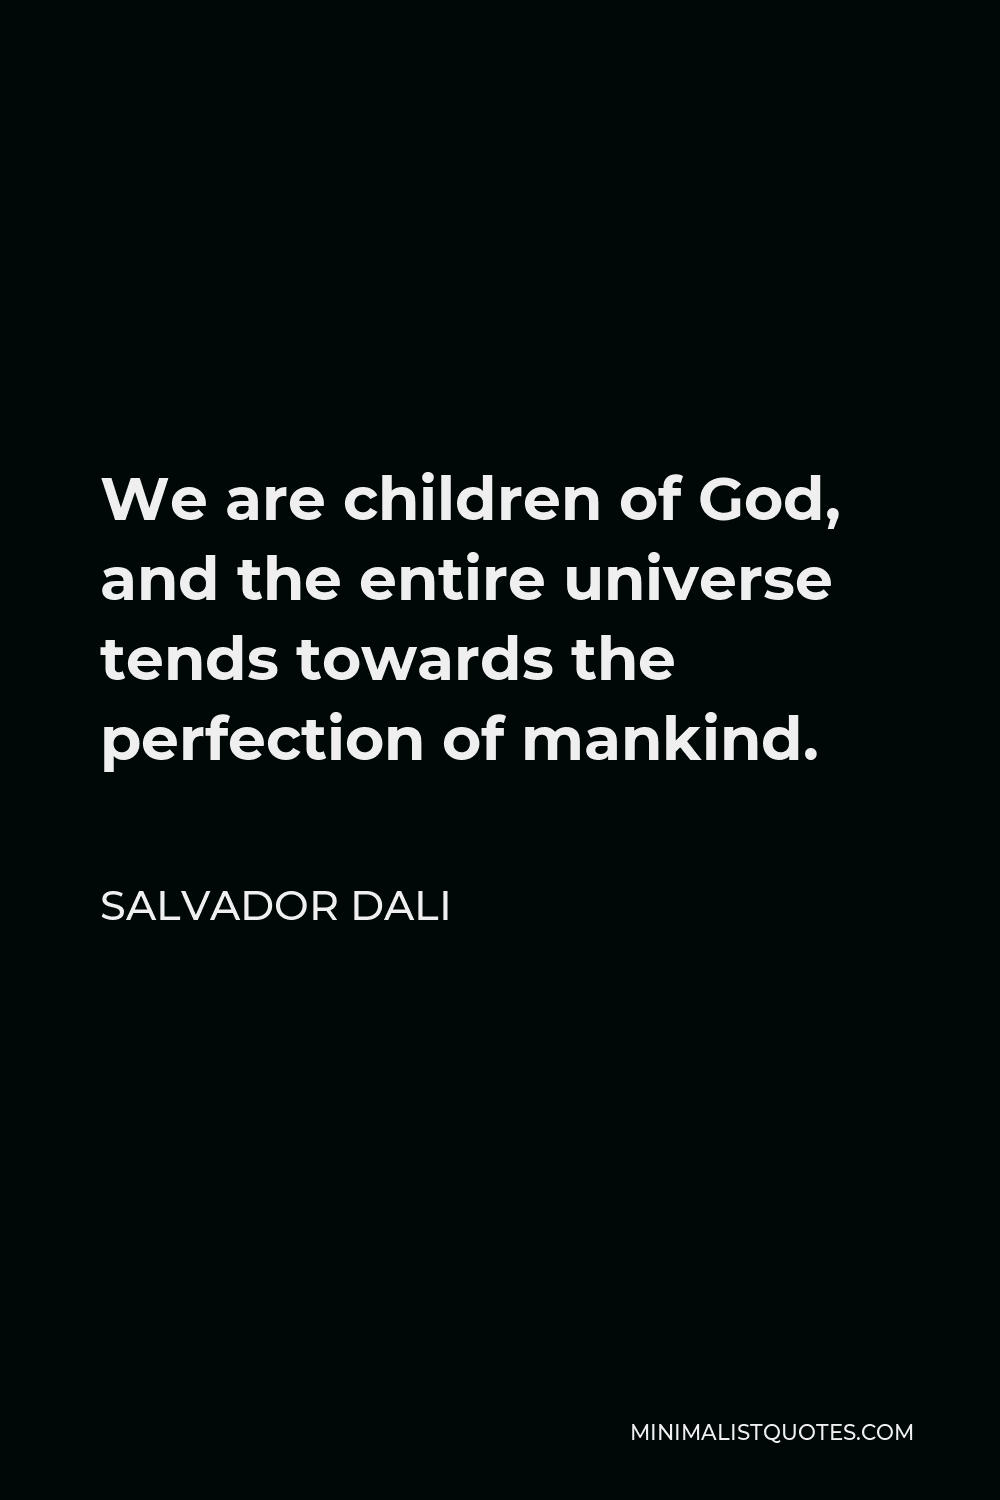 Salvador Dali Quote - We are children of God, and the entire universe tends towards the perfection of mankind.